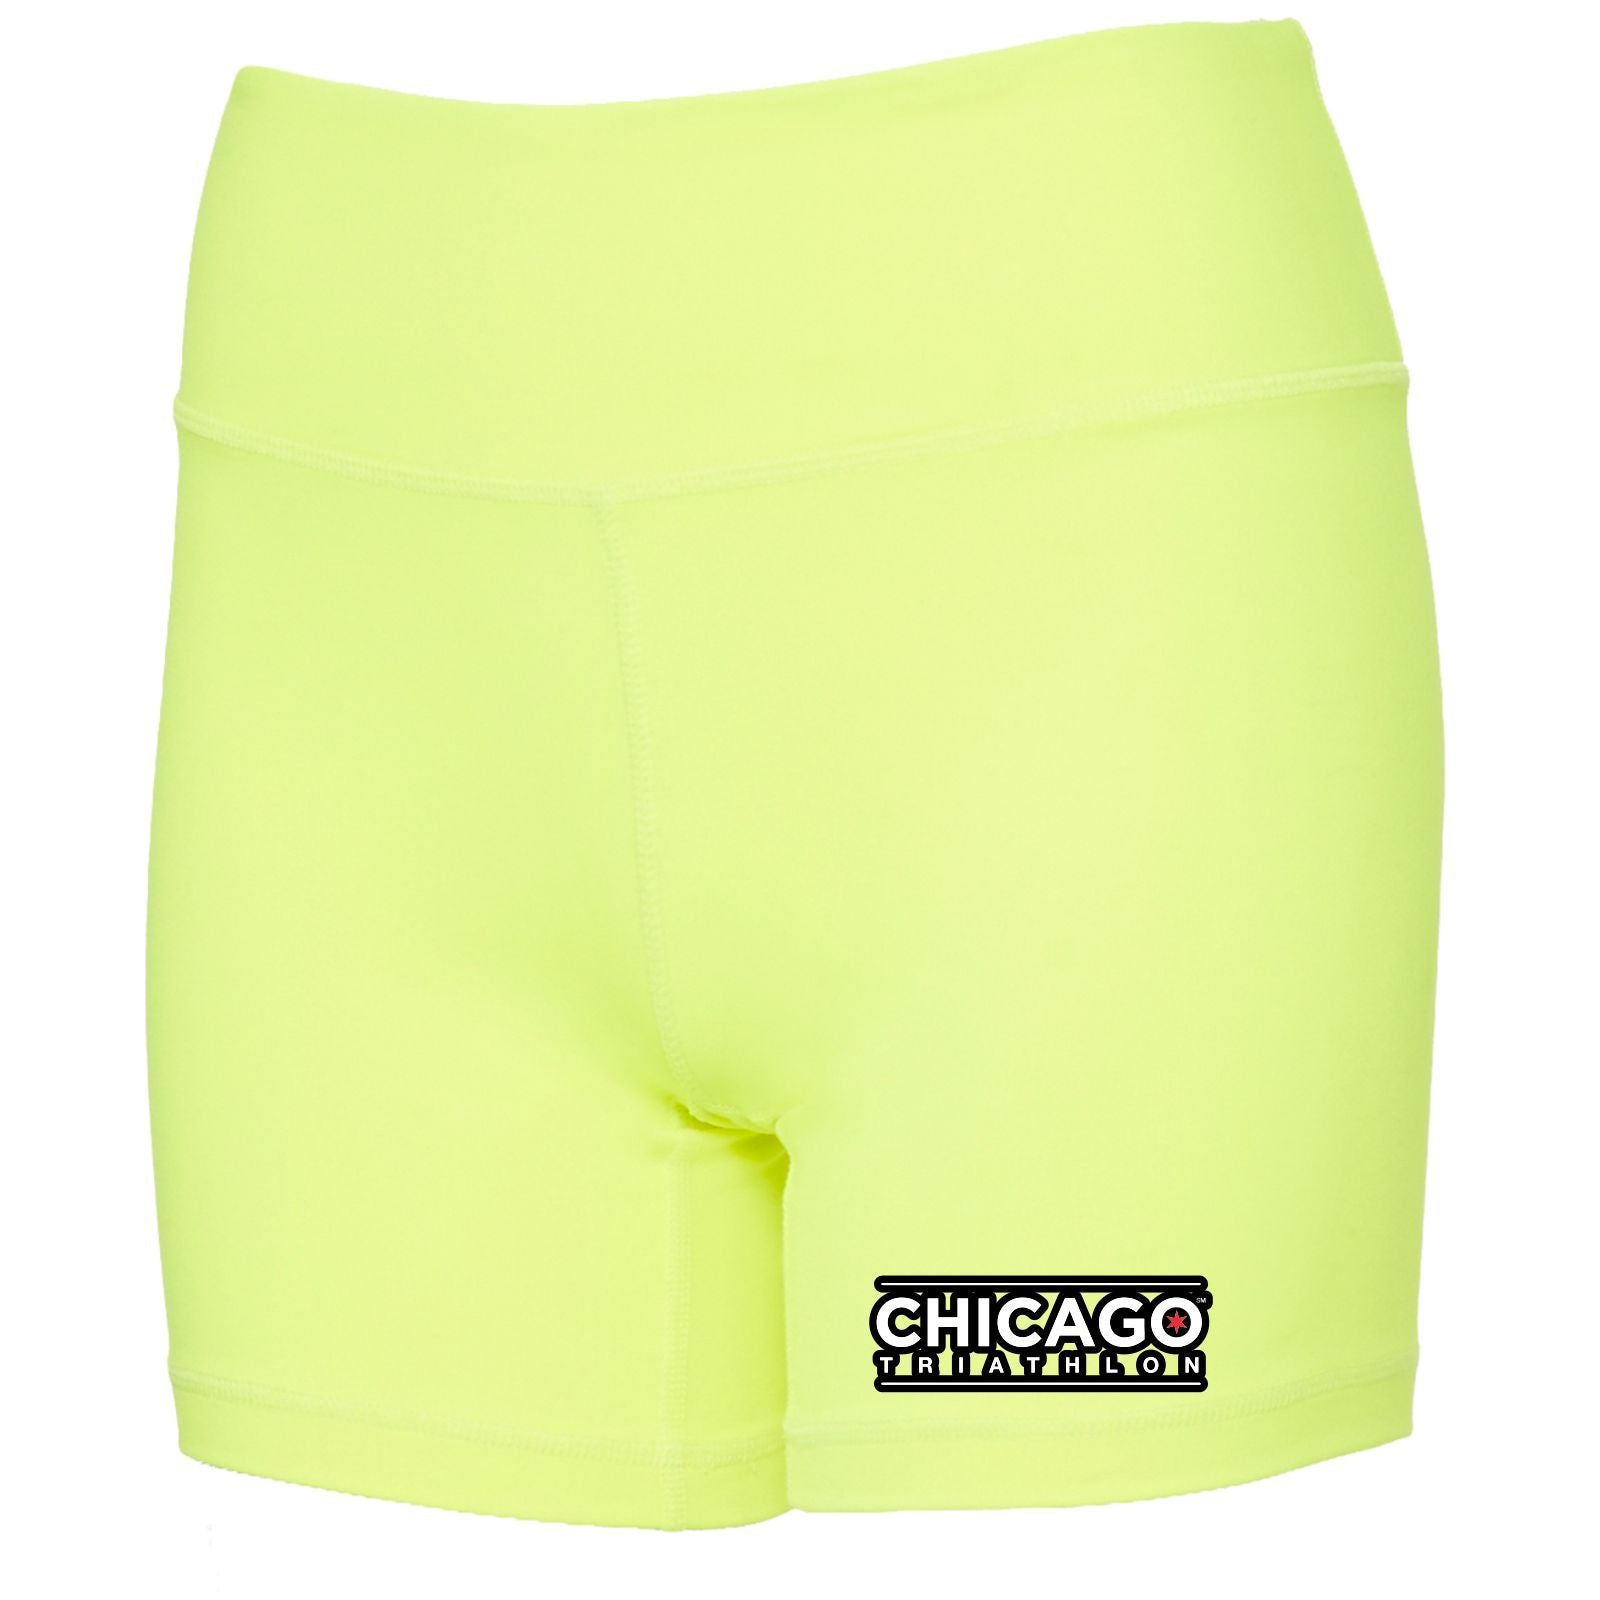 CHI TRI Women's Yoga Mid-Rise Shorts - Safety Yellow